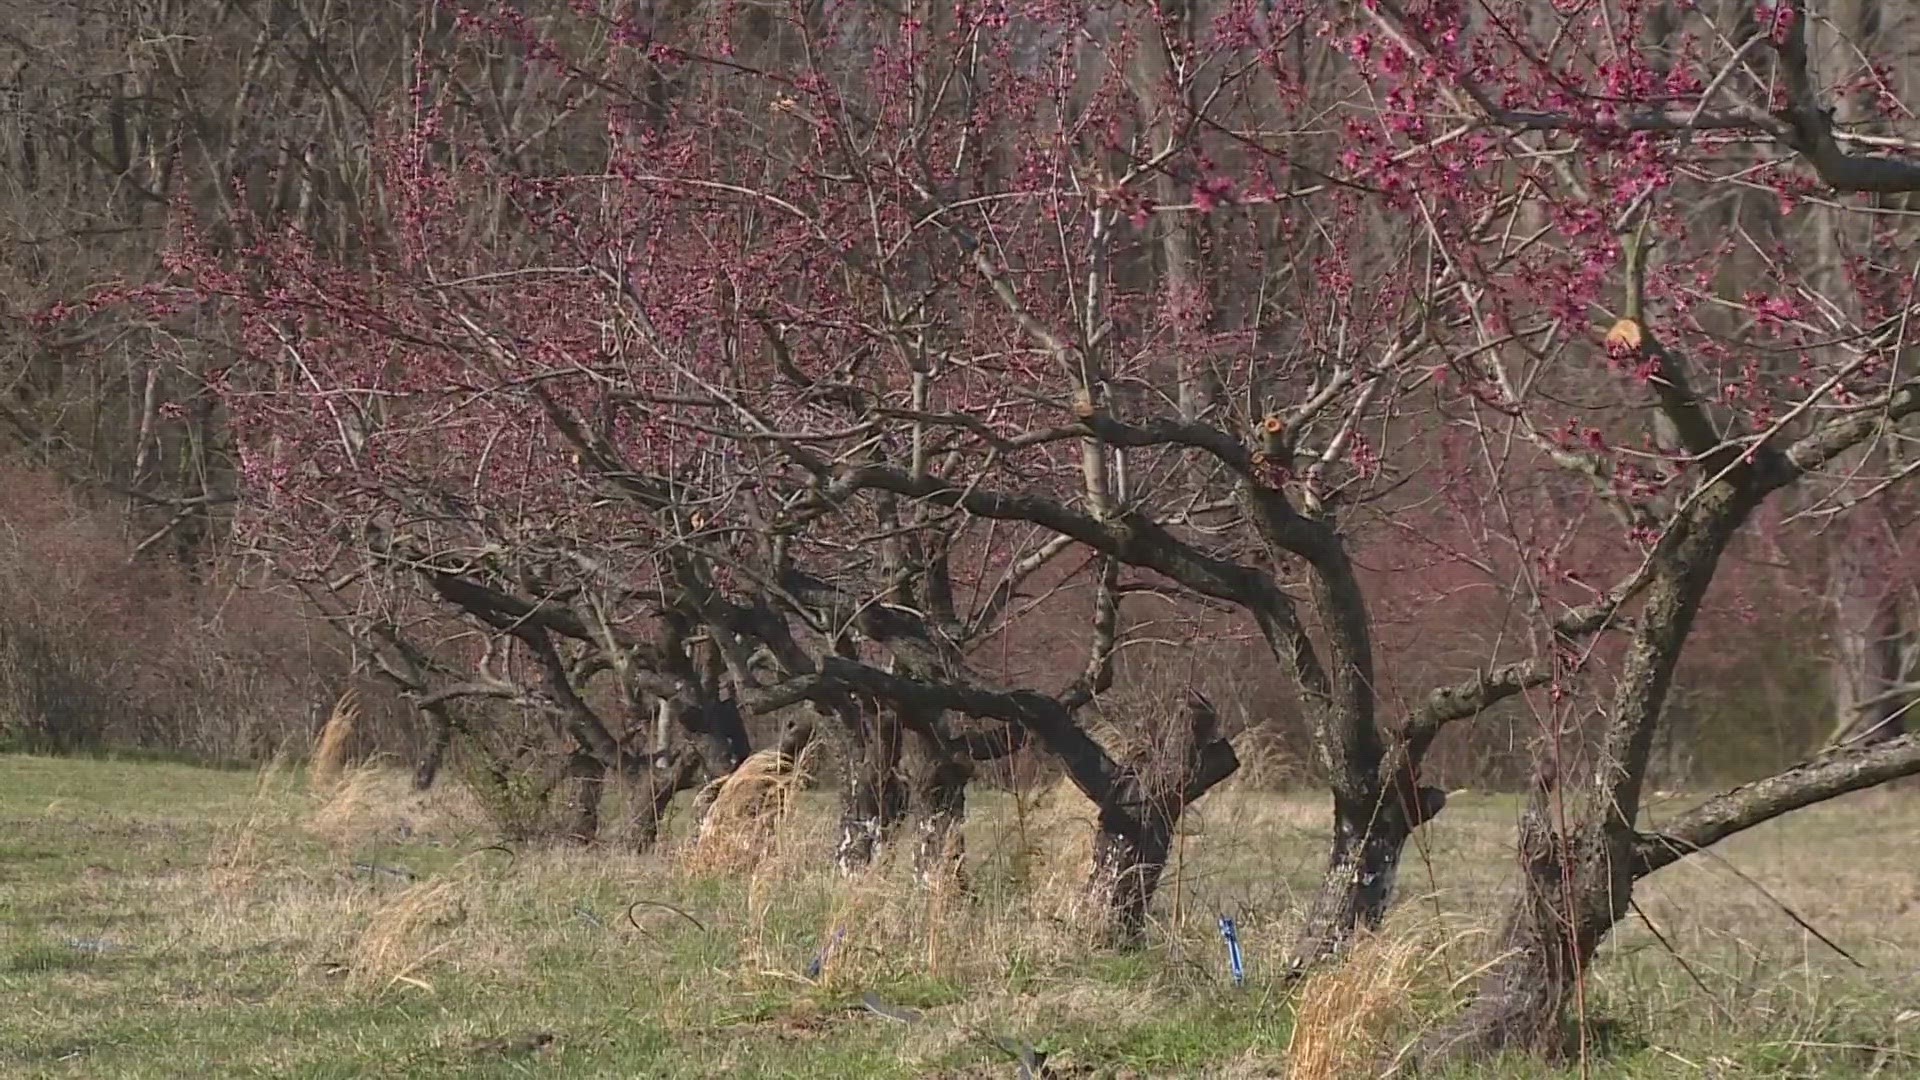 Buttermilk Creek Farm’s peach trees bloomed early because of a warm February. Winter air could kill all of the crops that are ahead of schedule.